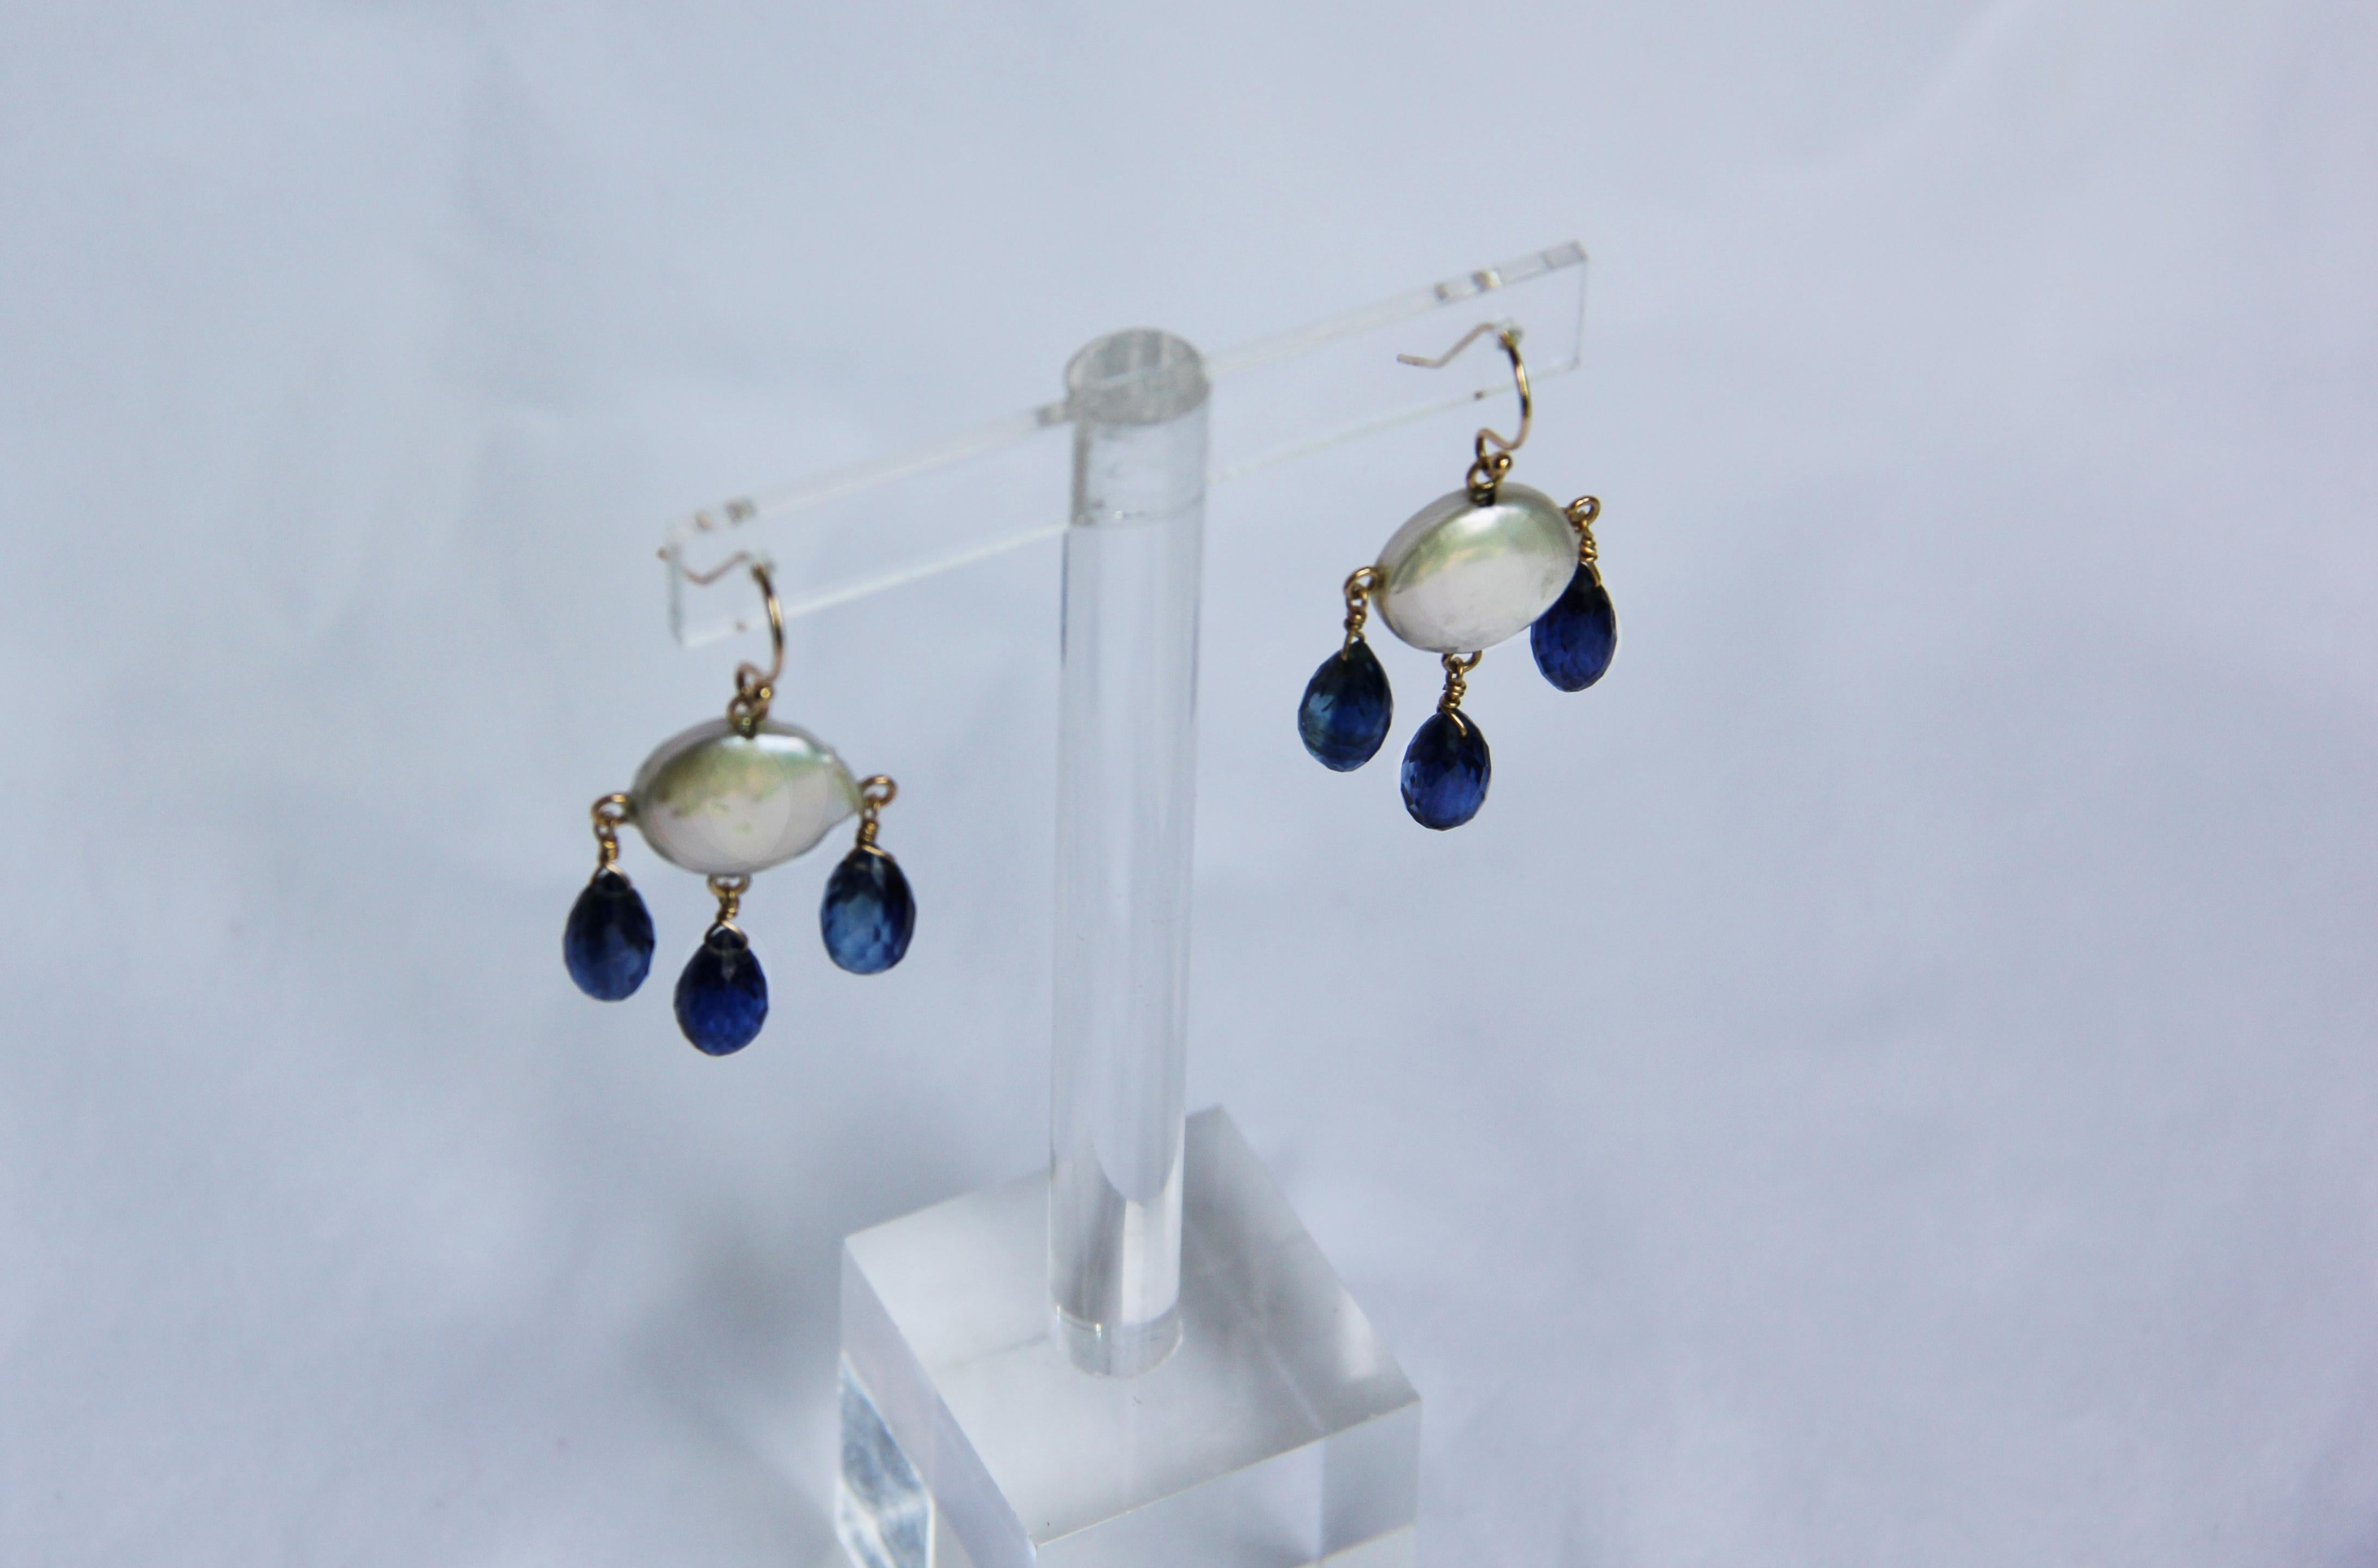 Gorgeous pair of earrings by Marina J. This pair of Chandelier Earrings feature small Coin Pearls displaying a magnificent iridescent luster, adorned by Faceted Kyanite Teardrop Stones. The three Kyanite Stones flash vivid hues of blues in the